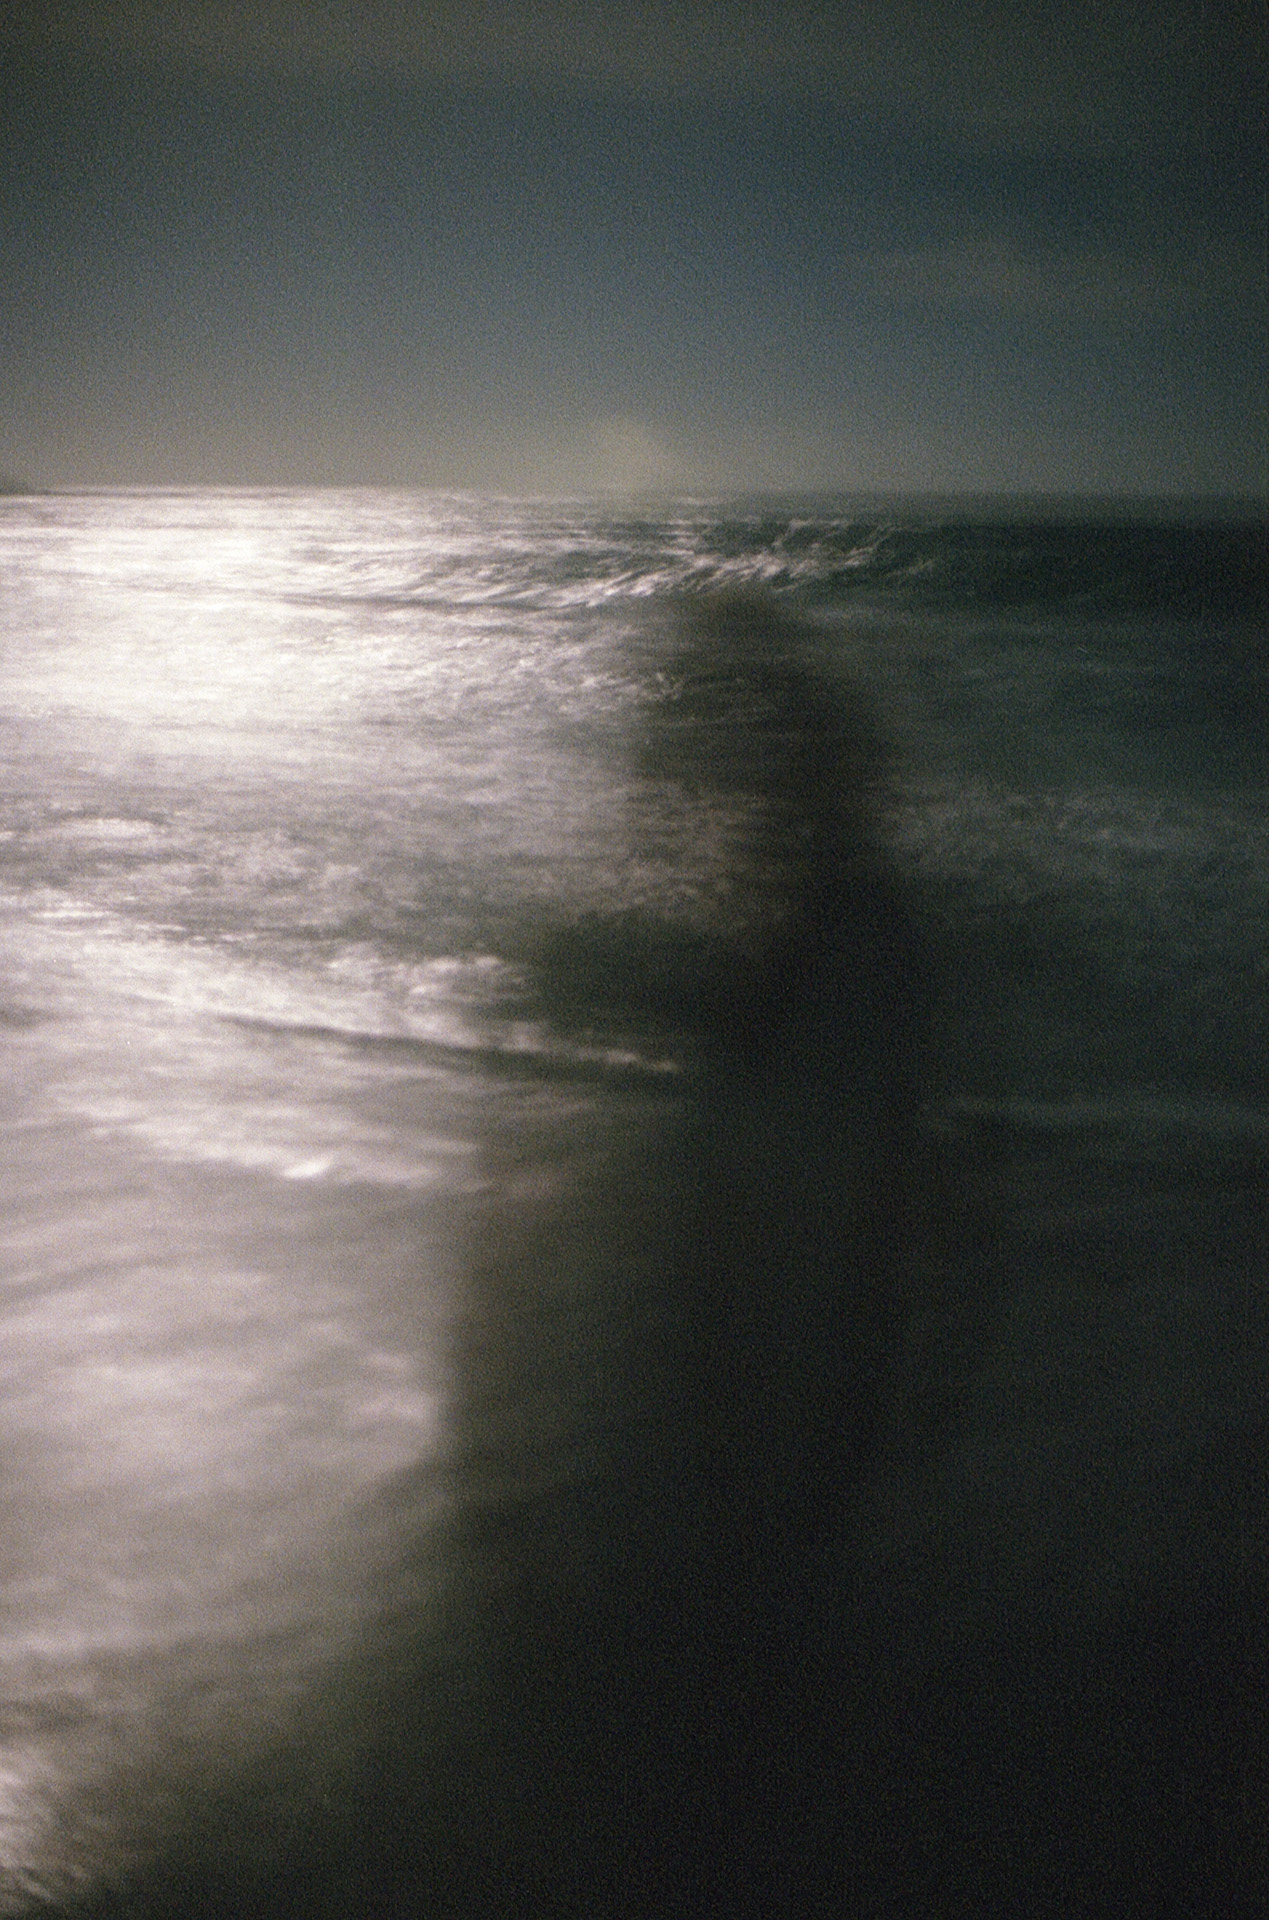 Eden’s shadow is very blurred against the background of ocean waves. Her figure is slightly distorted and becomes almost see through.